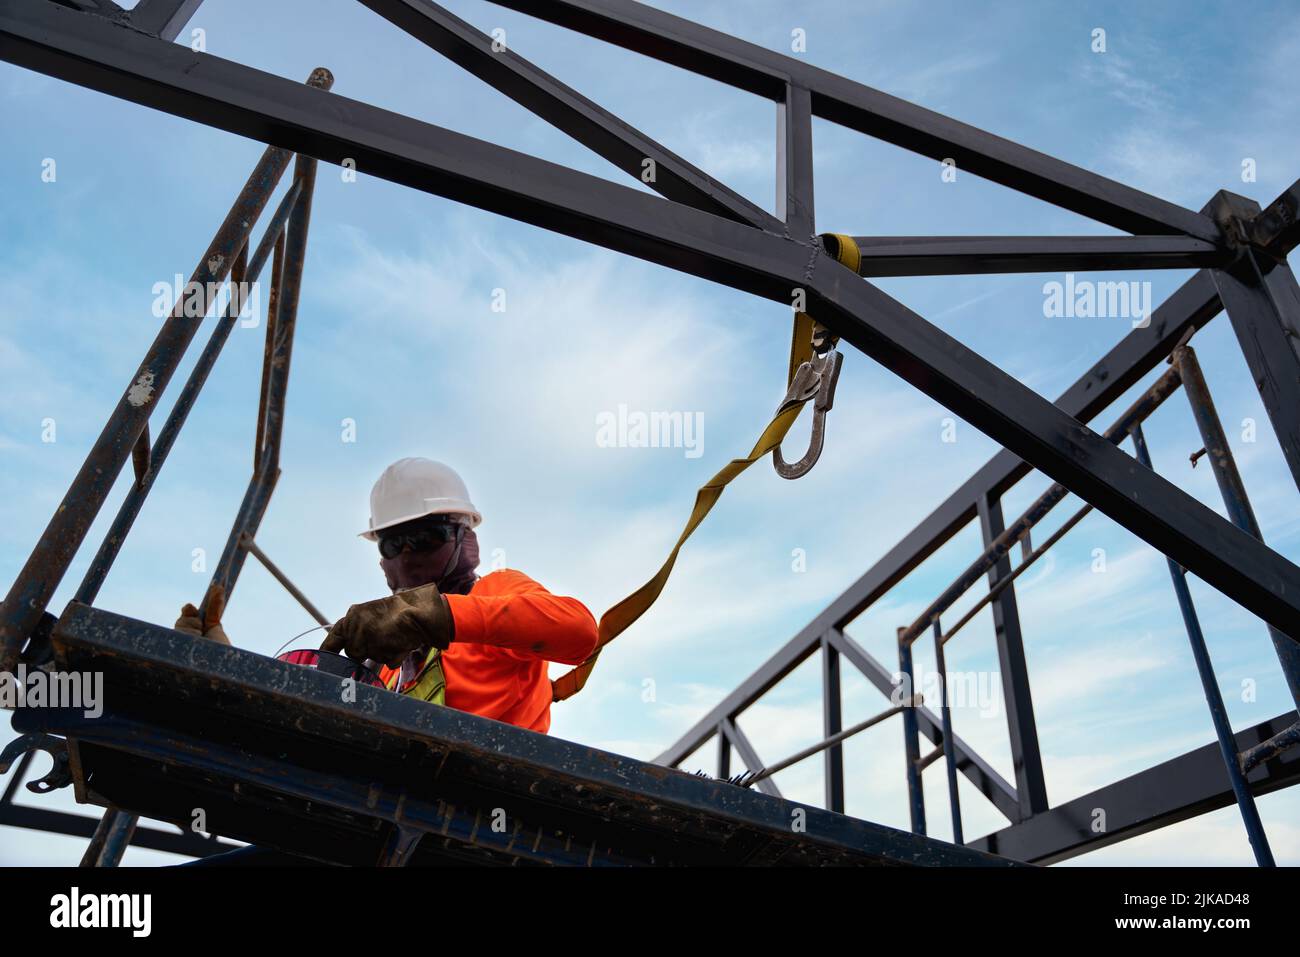 A Worker are working on the structure of the building with Fall arrestor device for worker with hooks for safety body harness at construction site. Stock Photo